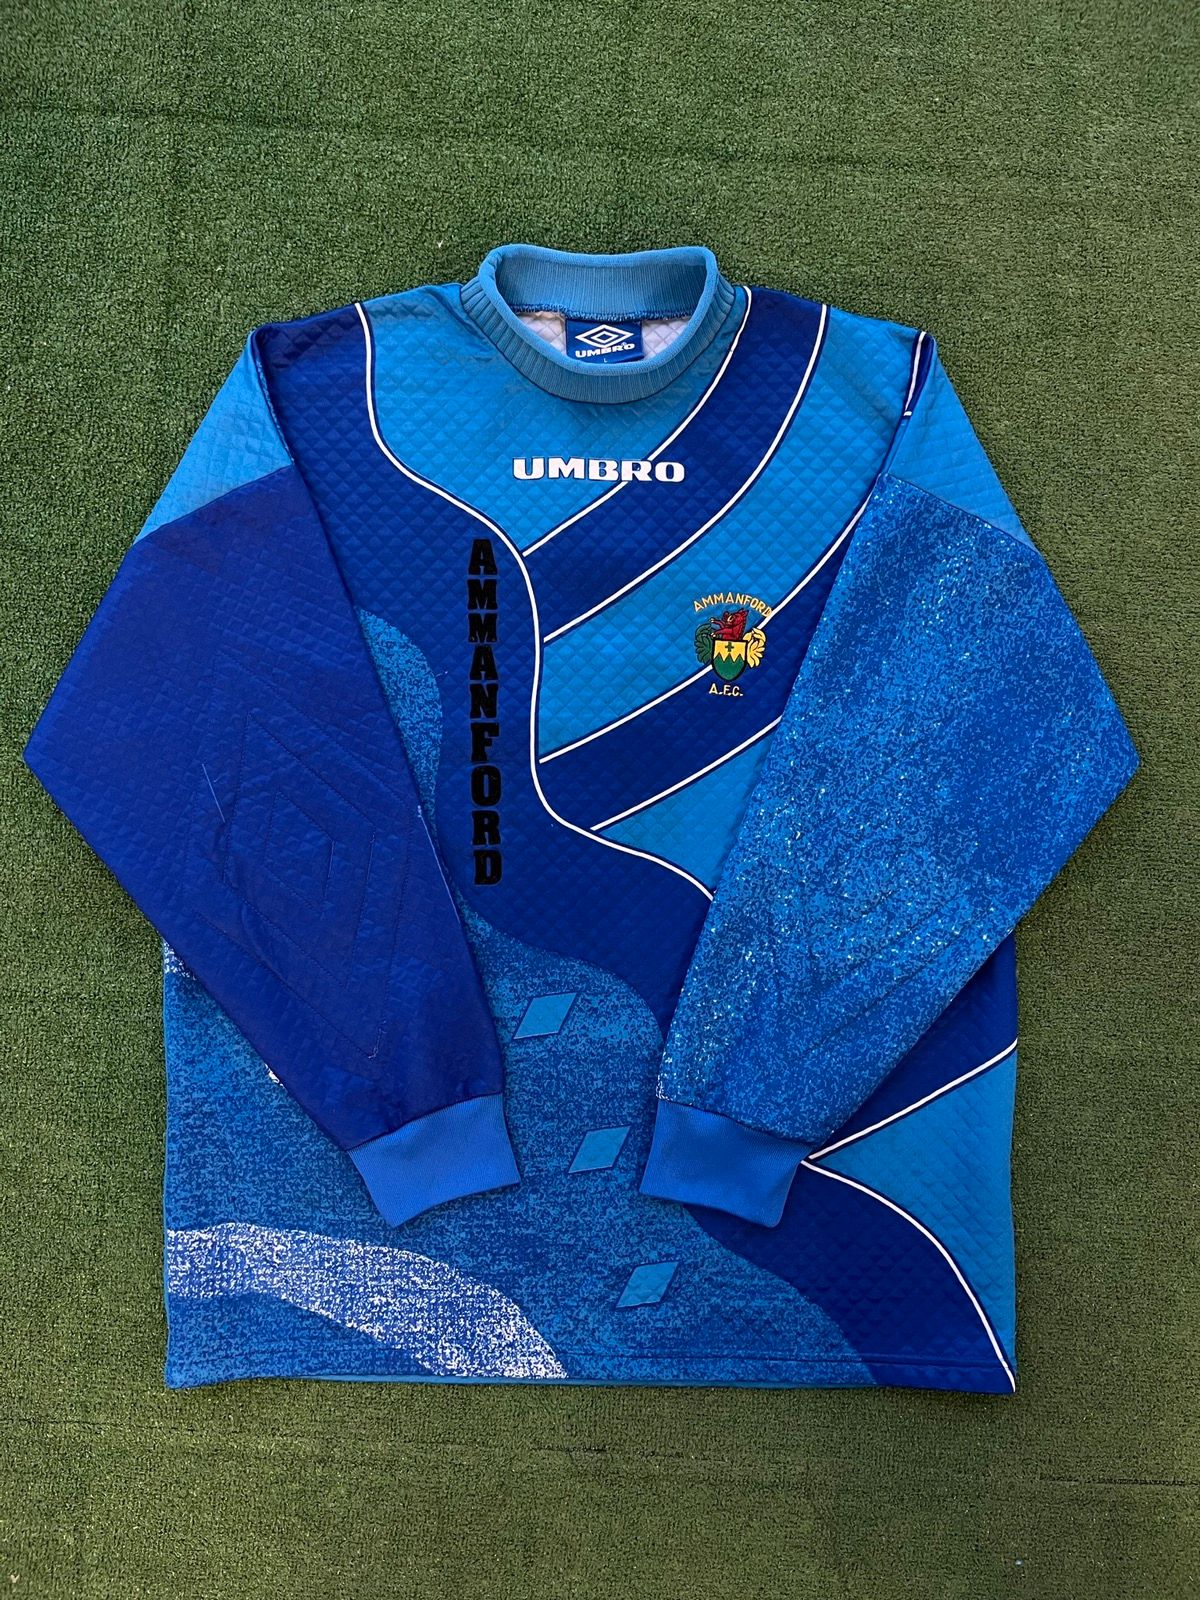 Pre-owned Soccer Jersey X Umbro Vintage Blokecore Umbro Ammanford Goalkeeper 1 Drill Jersey In Blue